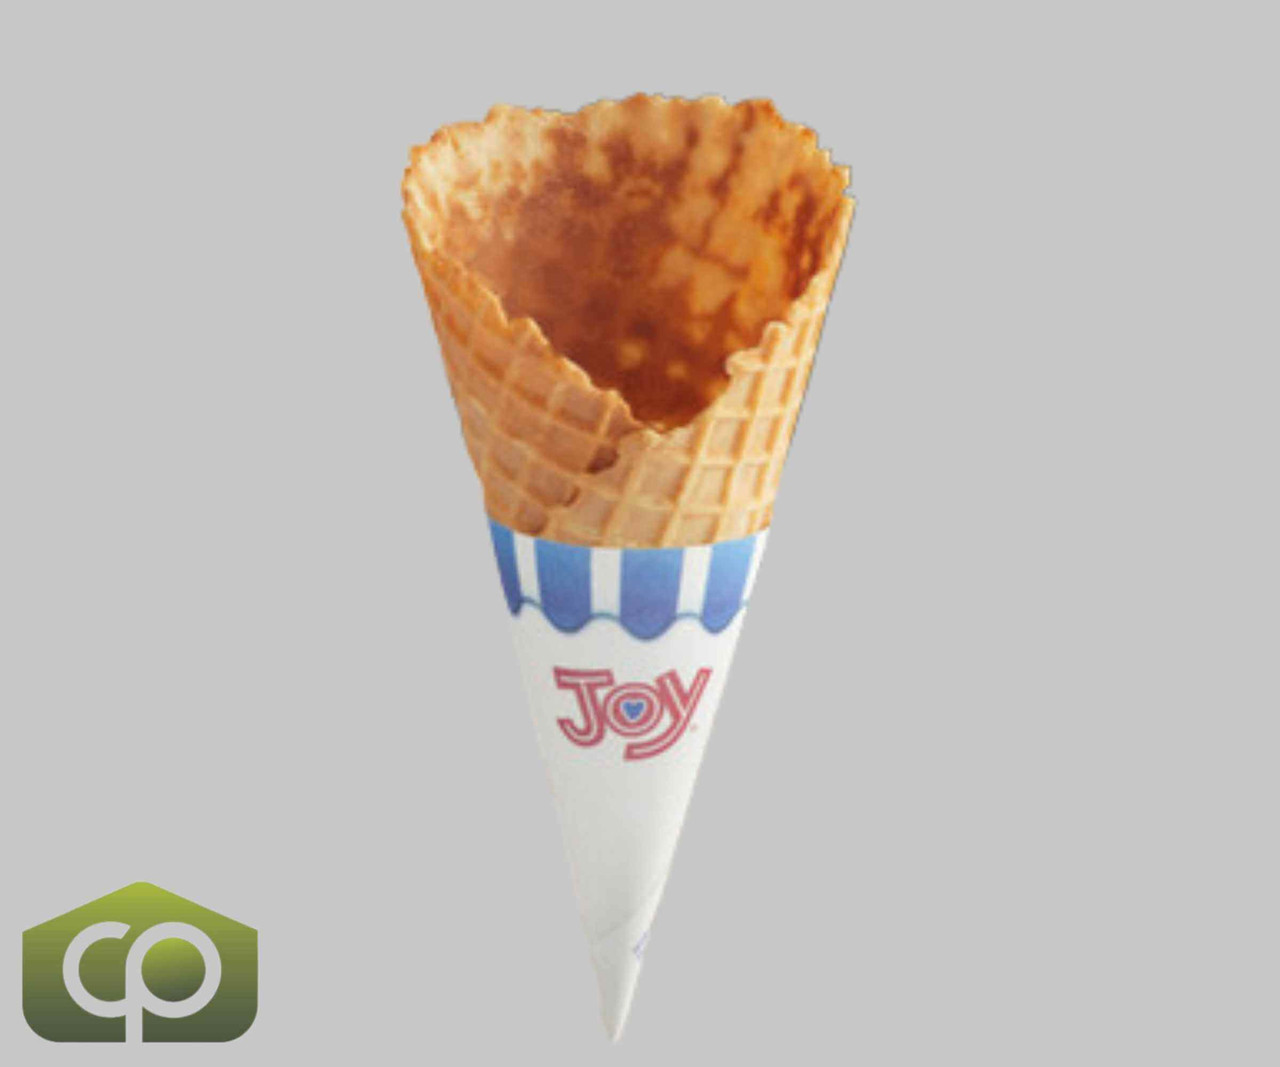 JOY Large Wide Mouth Jacketed Waffle Cone - 198/Case for Gourmet Ice Cream Delights